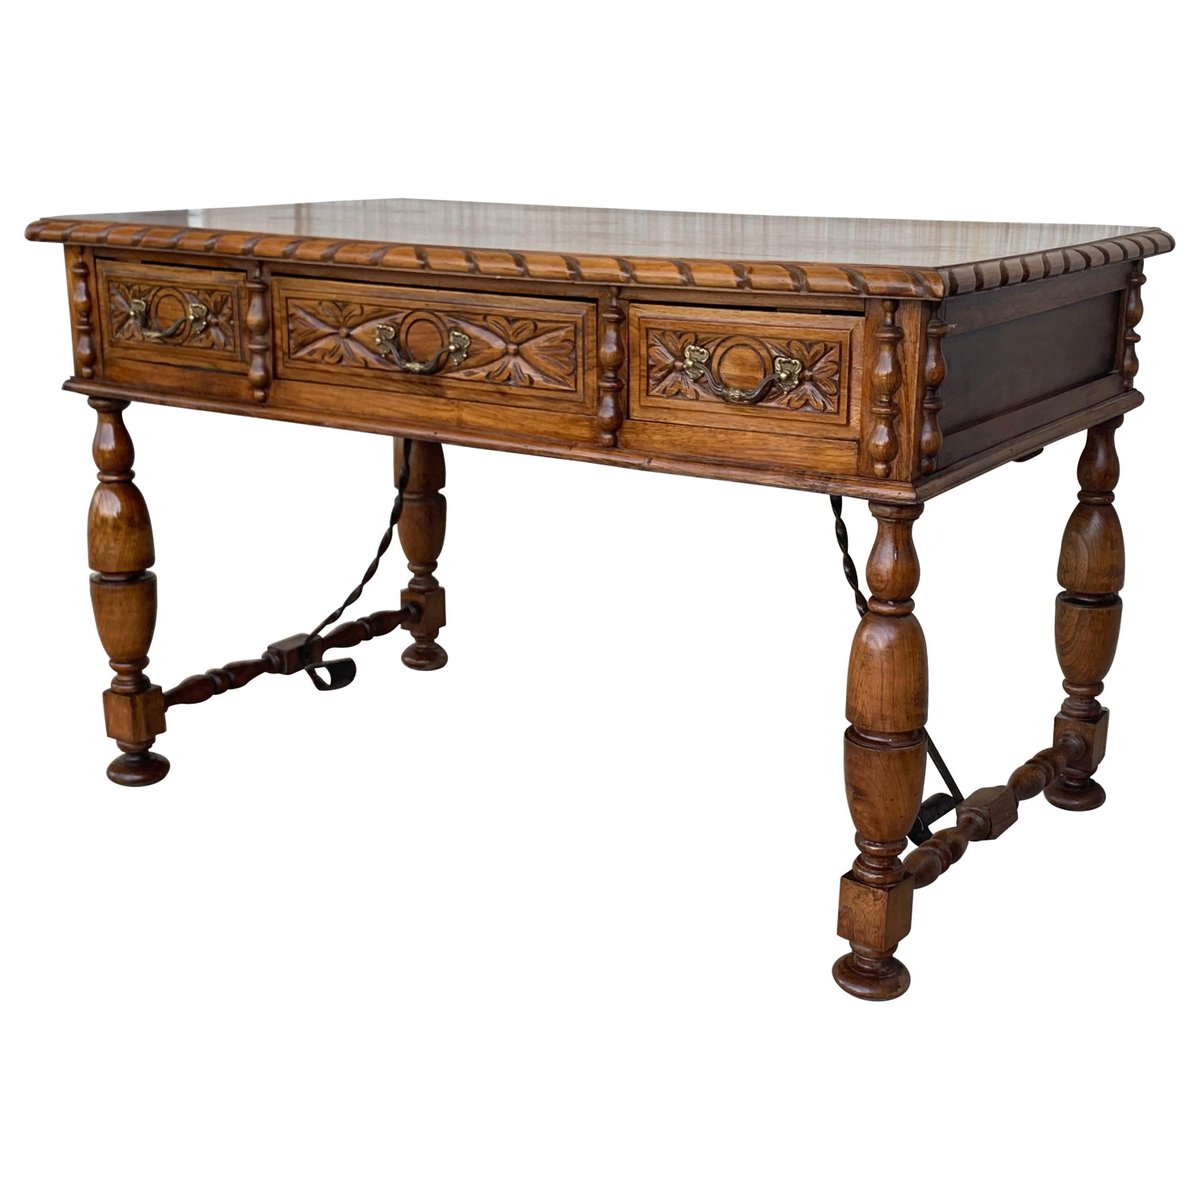 20th century french louis xv style carved walnut desk with three drawers PSK-1002629